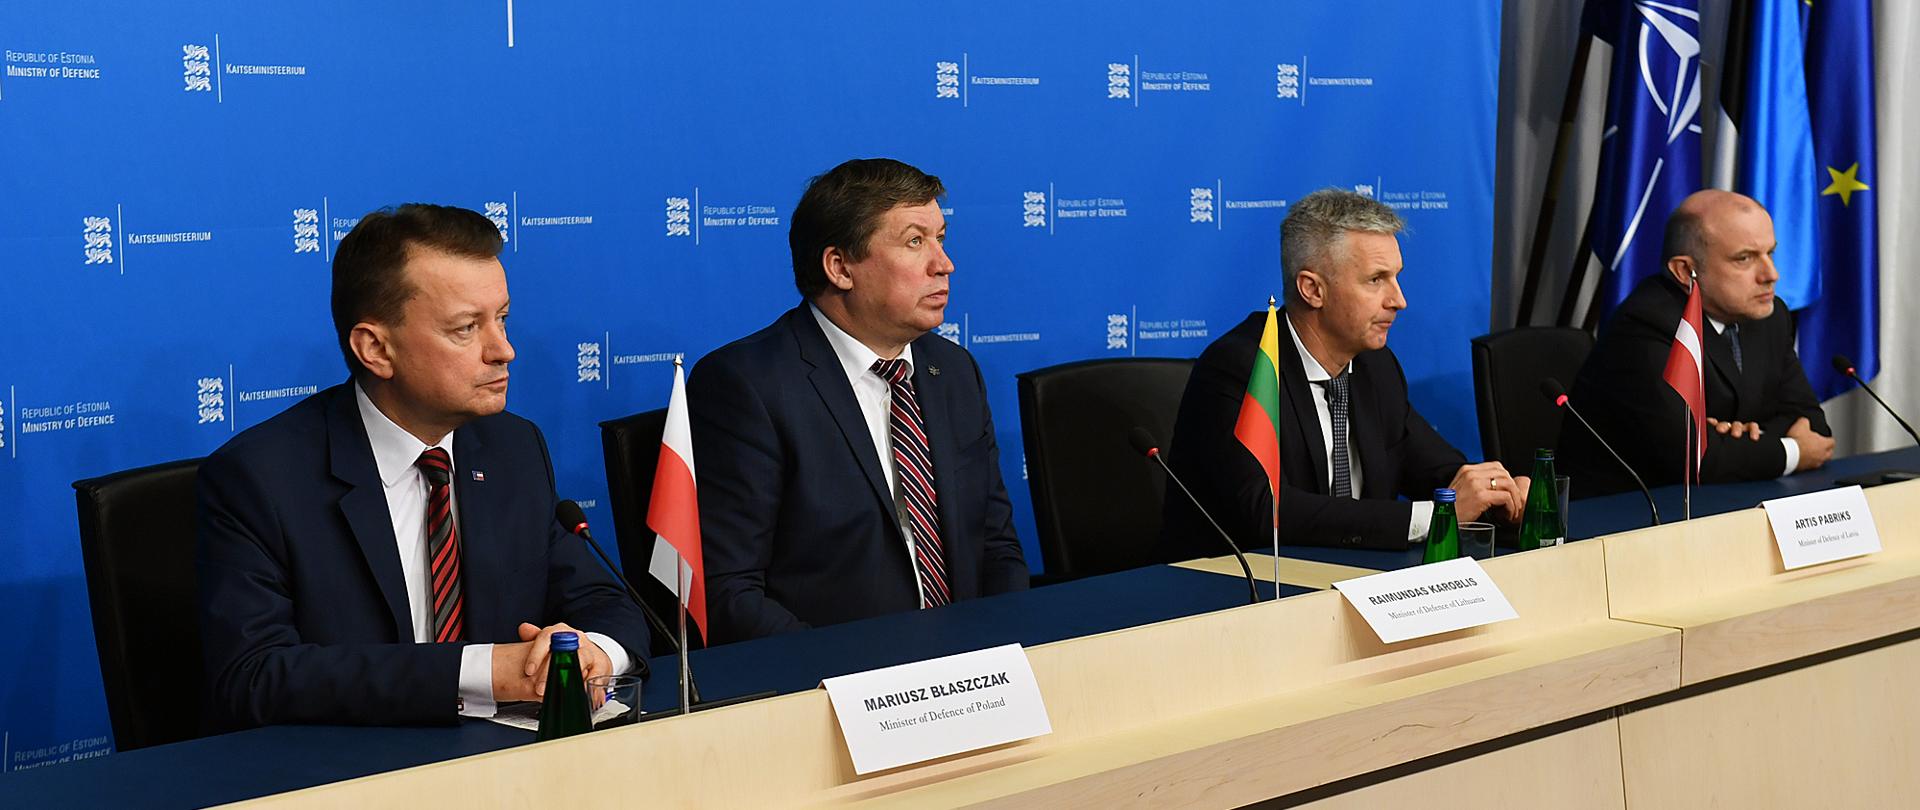 Press conference of the defence ministers of the Baltic States and Poland